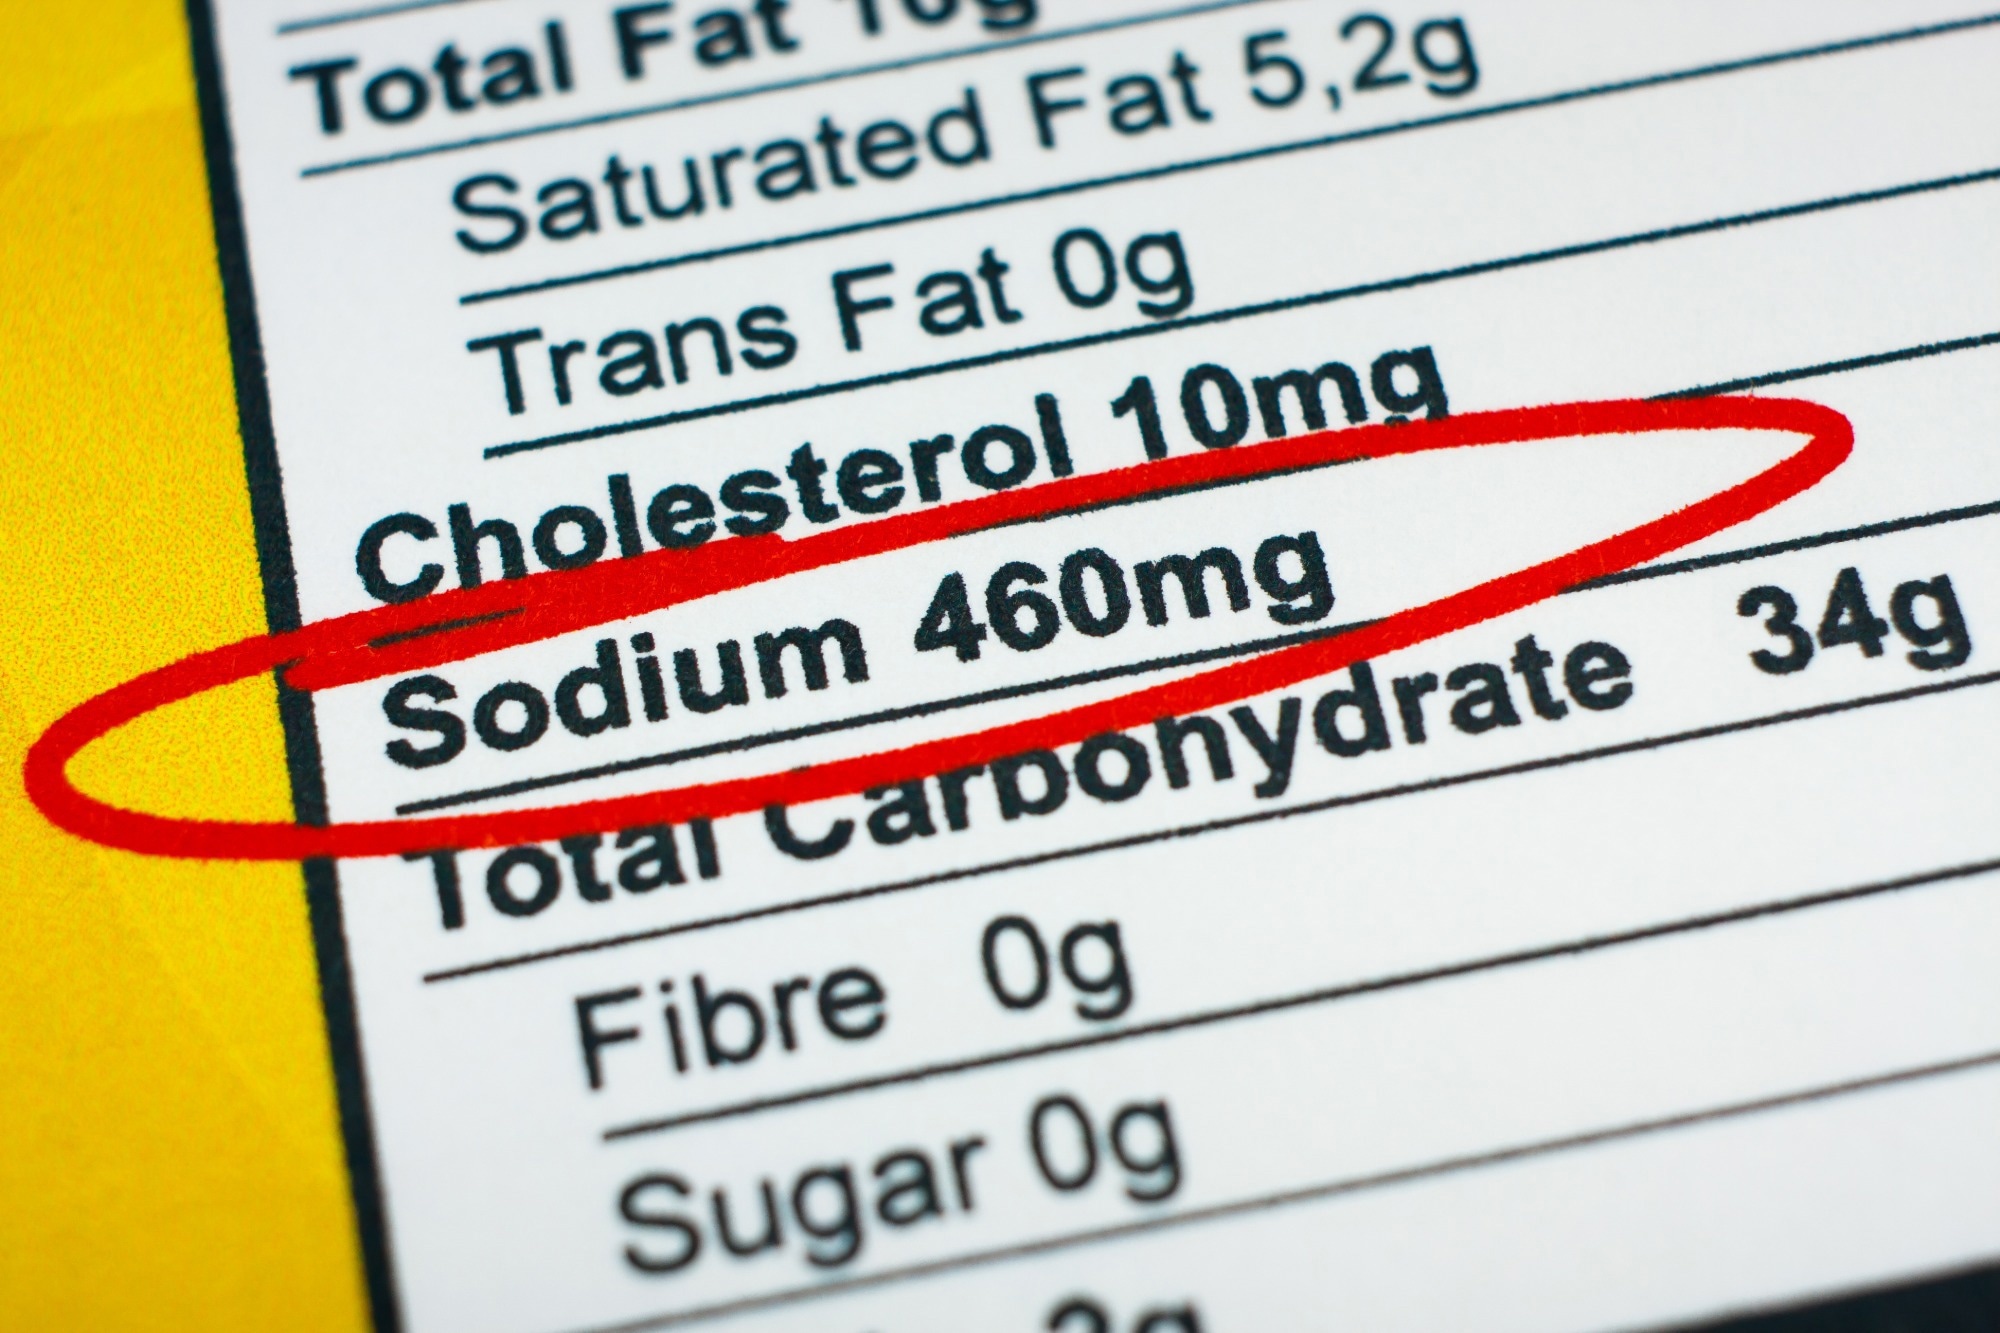 Study: Top Sodium Food Sources in the American Diet—Using National Health and Nutrition Examination Survey. Image Credit: Evan Lorne / Shutterstock